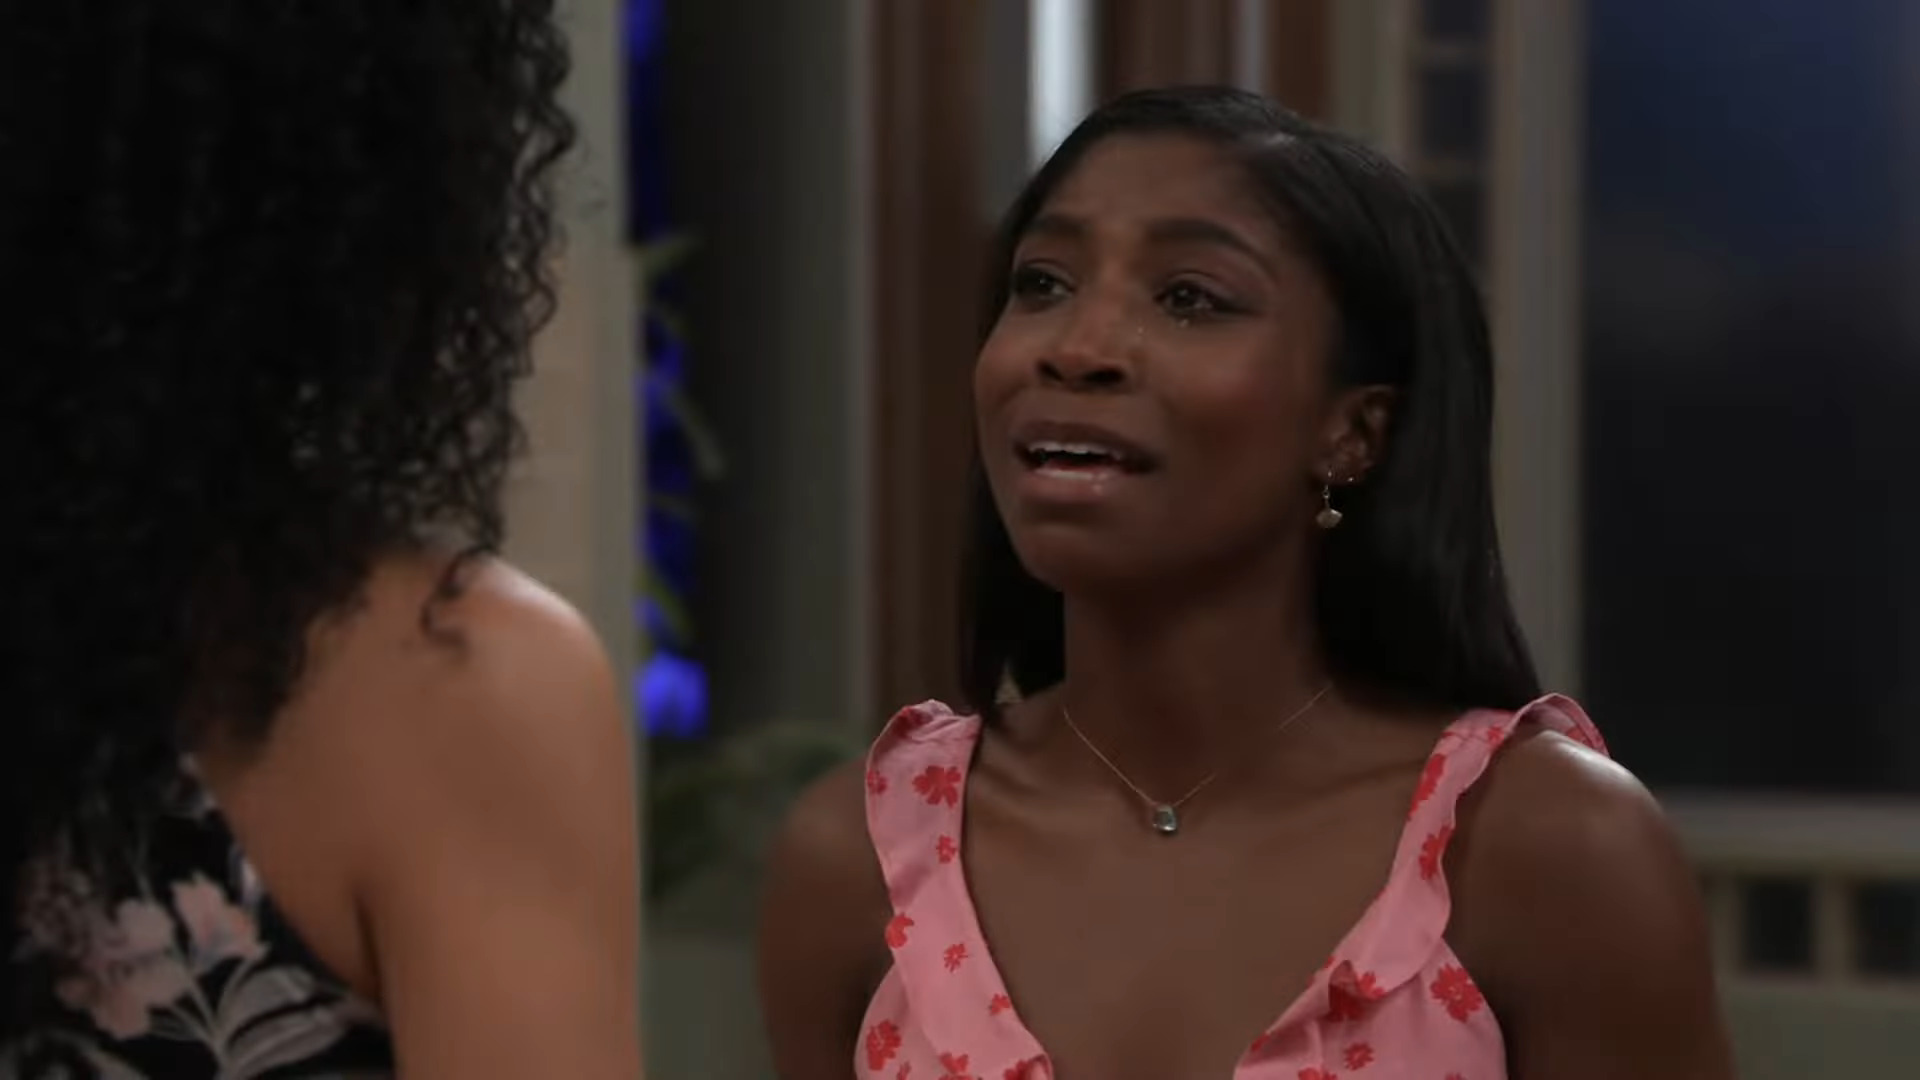 trina asks if curtis could be paralyzed